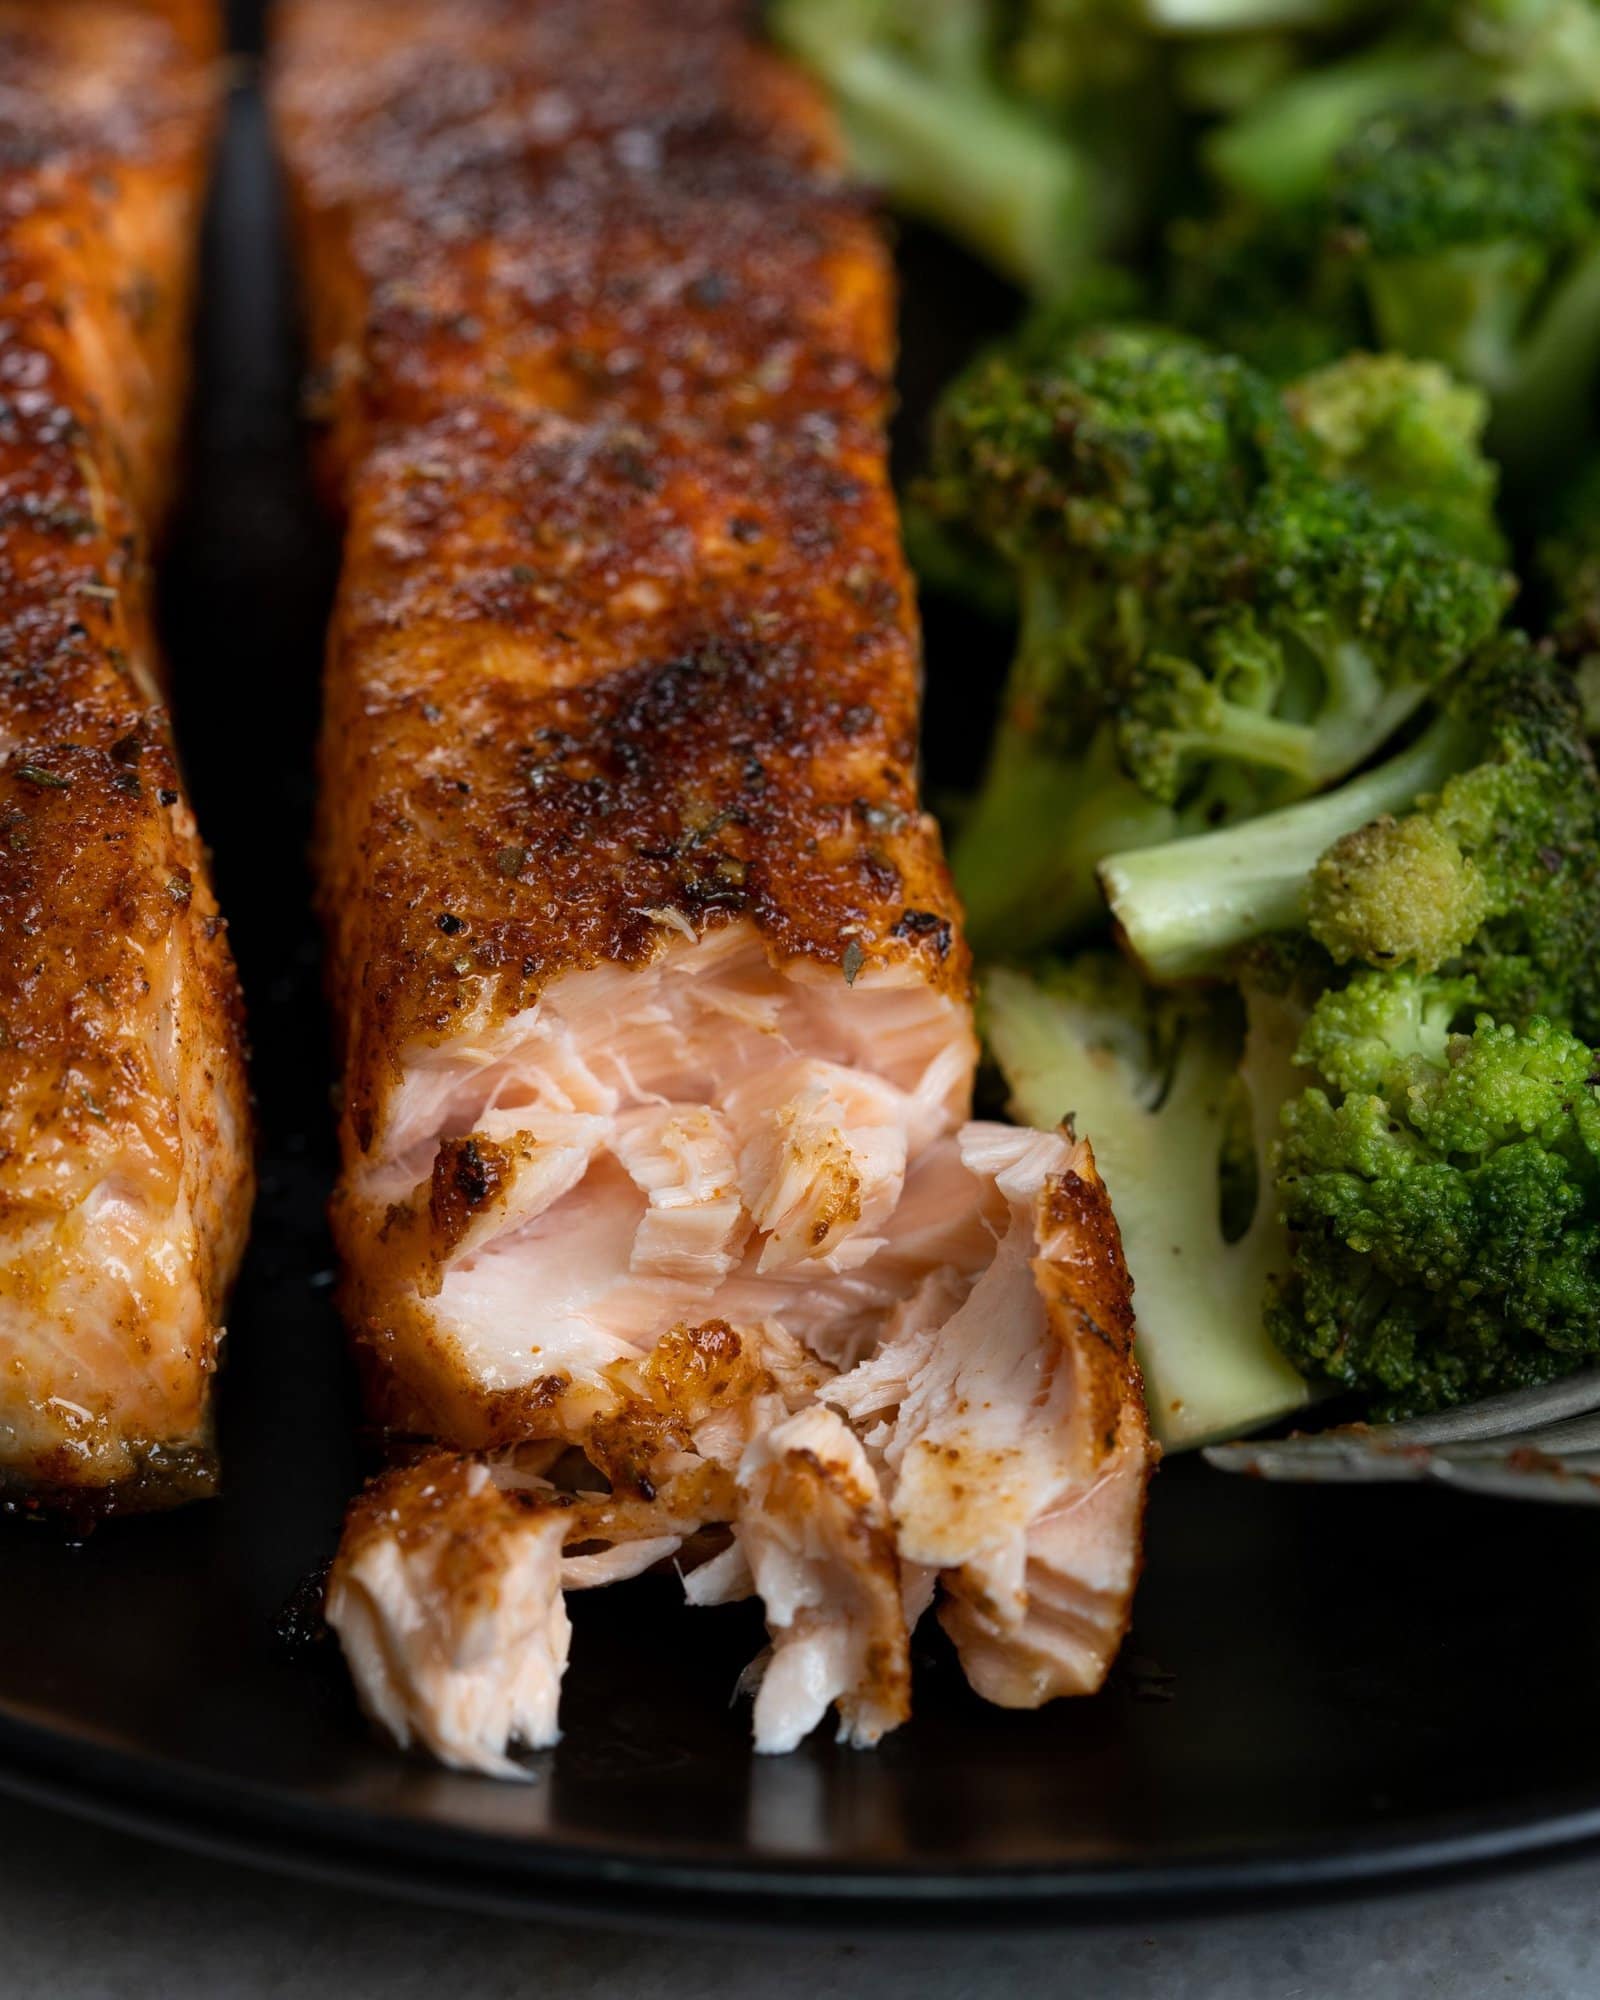 Salmon made in Air Fryer gives nice crust on top with crispy skin and tender flaky meat.